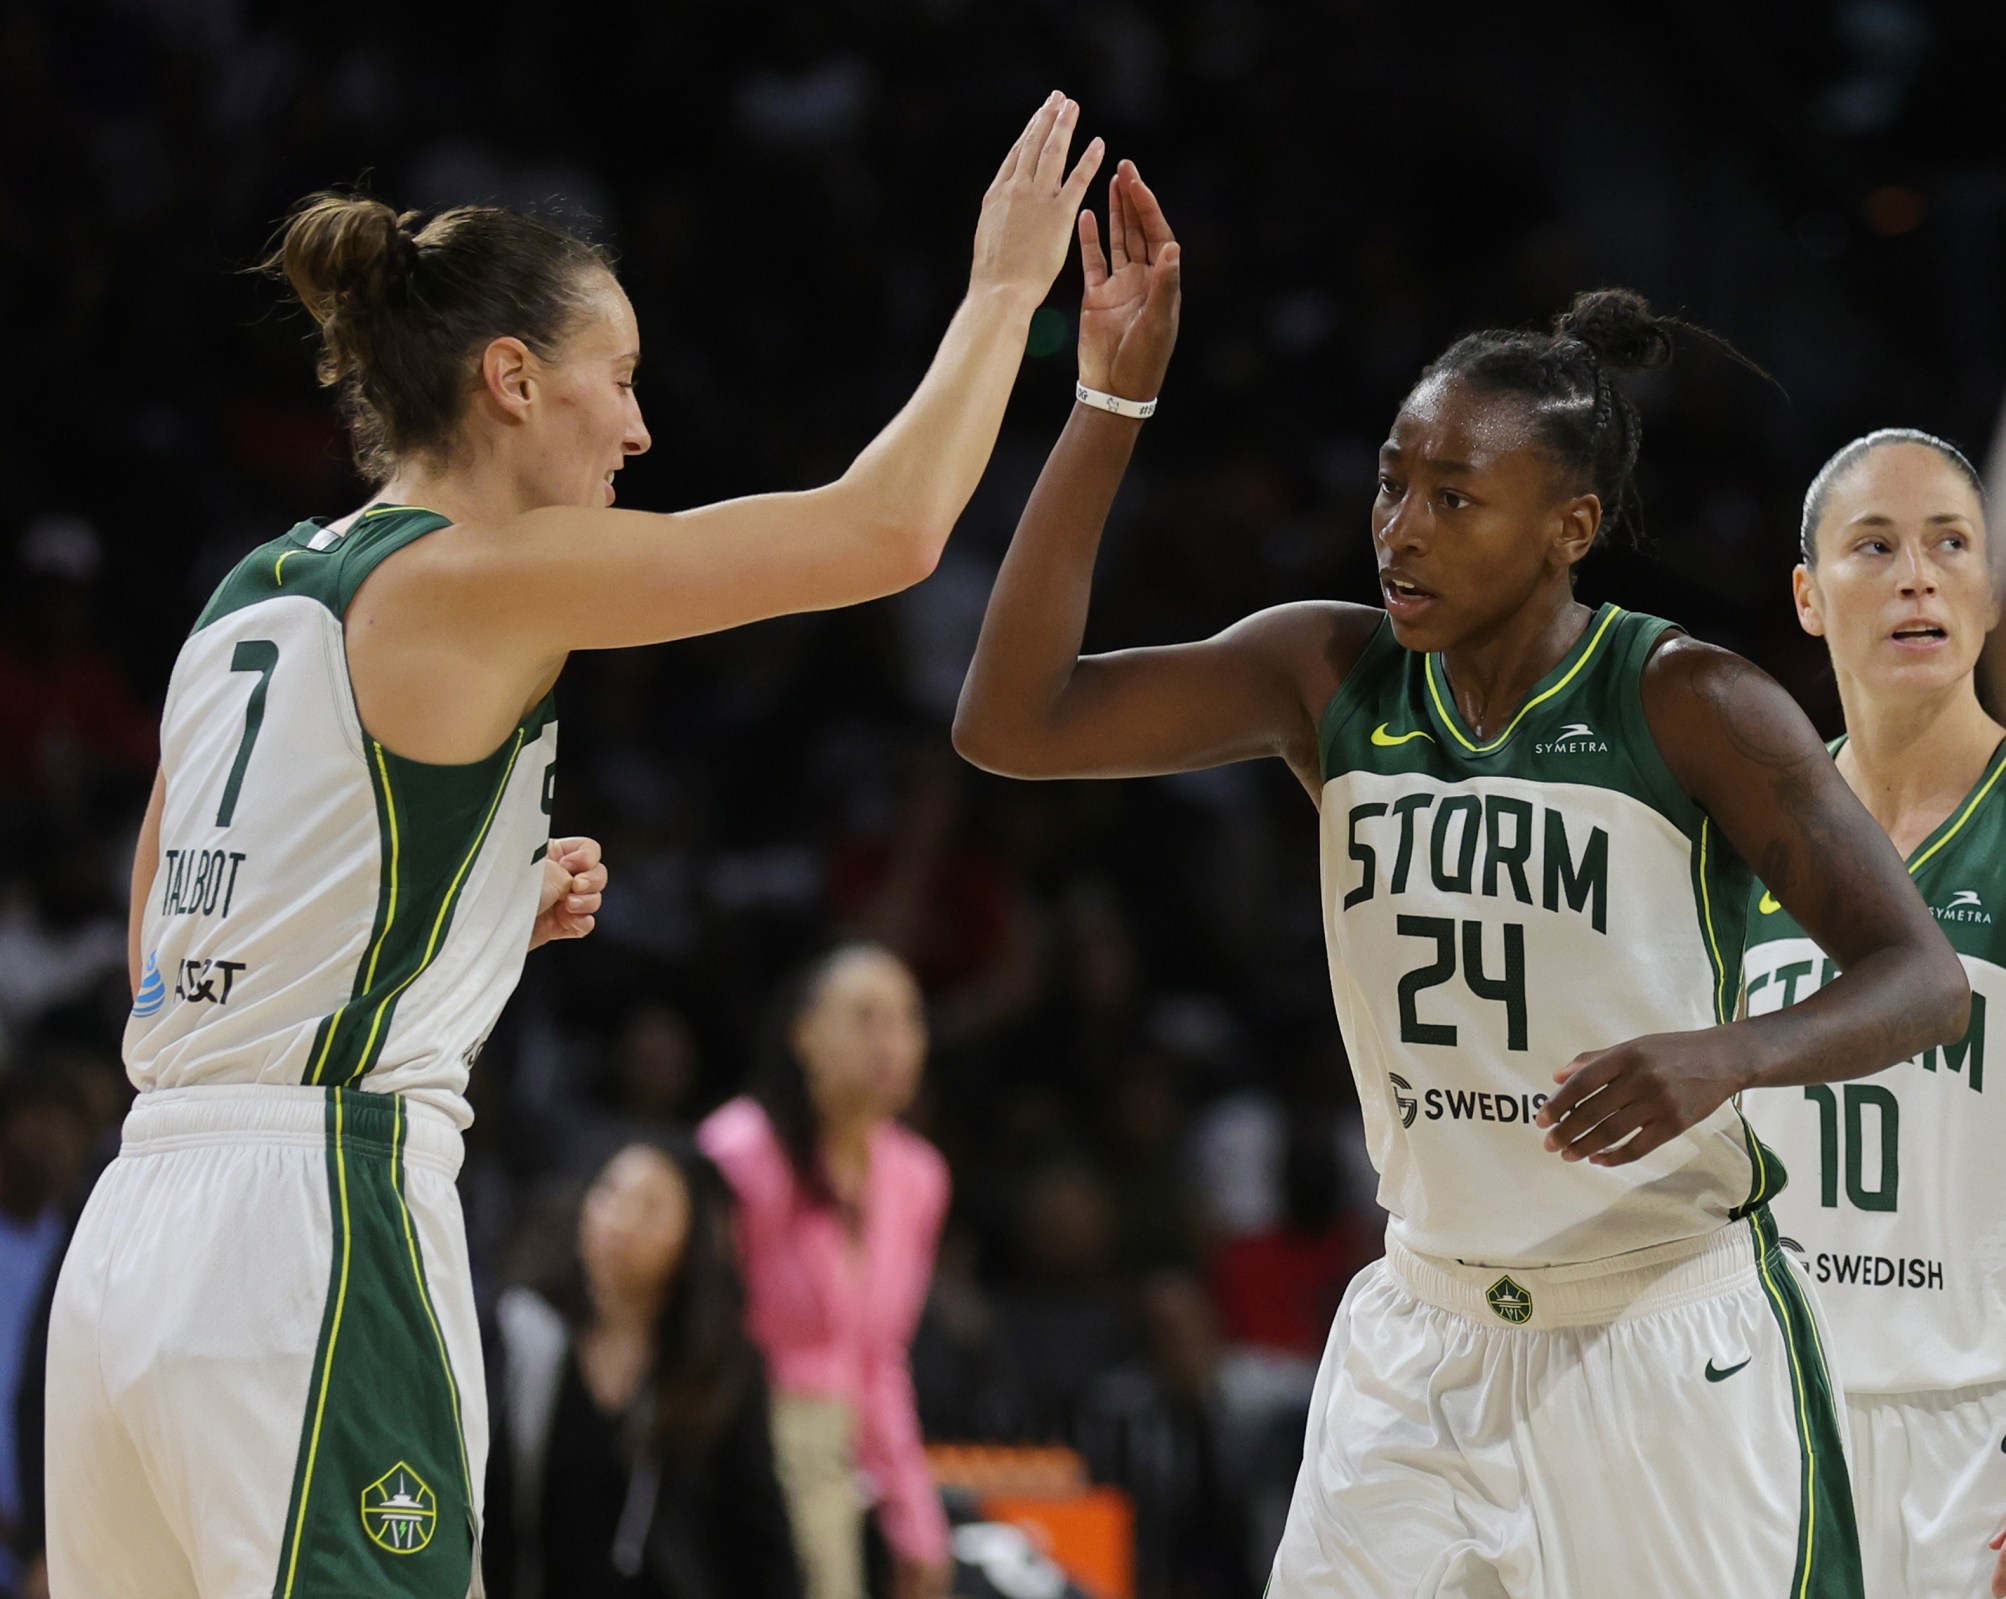 Stephanie Talbot #7 of the Seattle Storm high-fives Jewell Loyd #24 after she hit a 3-pointer against the Las Vegas Aces in the fourth quarter of Game One of the 2022 WNBA Playoffs semifinals at Michelob ULTRA Arena on August 28, 2022 in Las Vegas, Nevada. The Storm defeated the Aces 76-73.